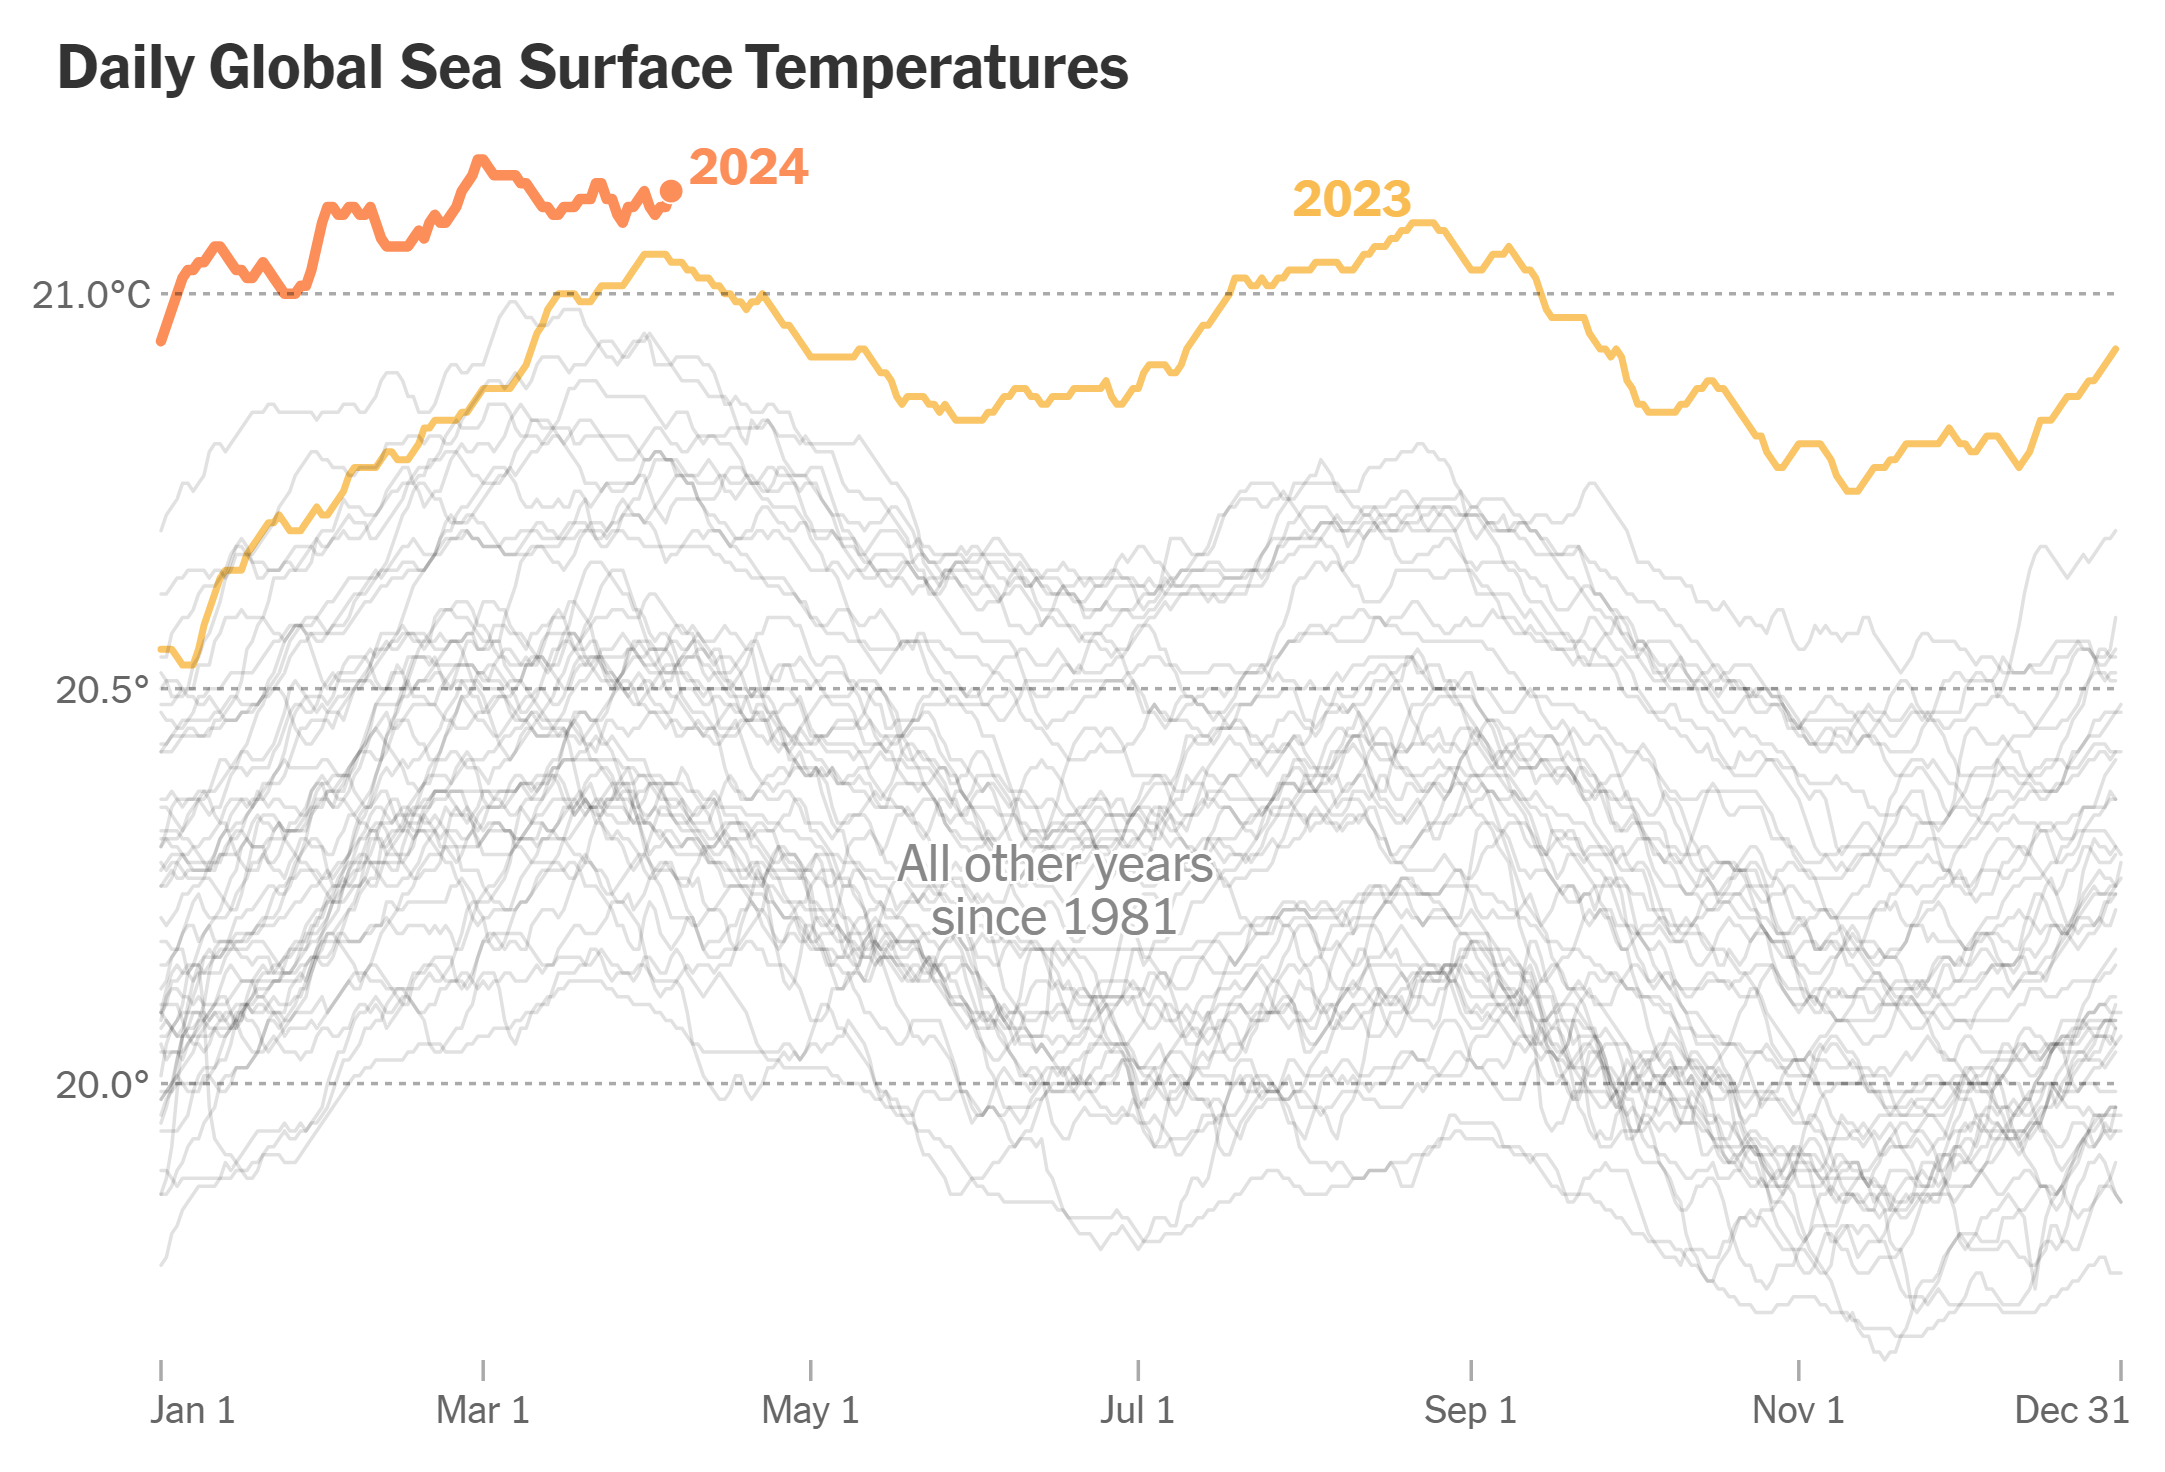 Daily global sea surface temperatures, 1981-2024. Data: Climate Reanalyzer, Climate Change Institute at the University of Maine, based on data from NOAA Optimum Interpolation Sea Surface Temperature (OISST) Data through 8 April 2024. Graphic: The New York Times